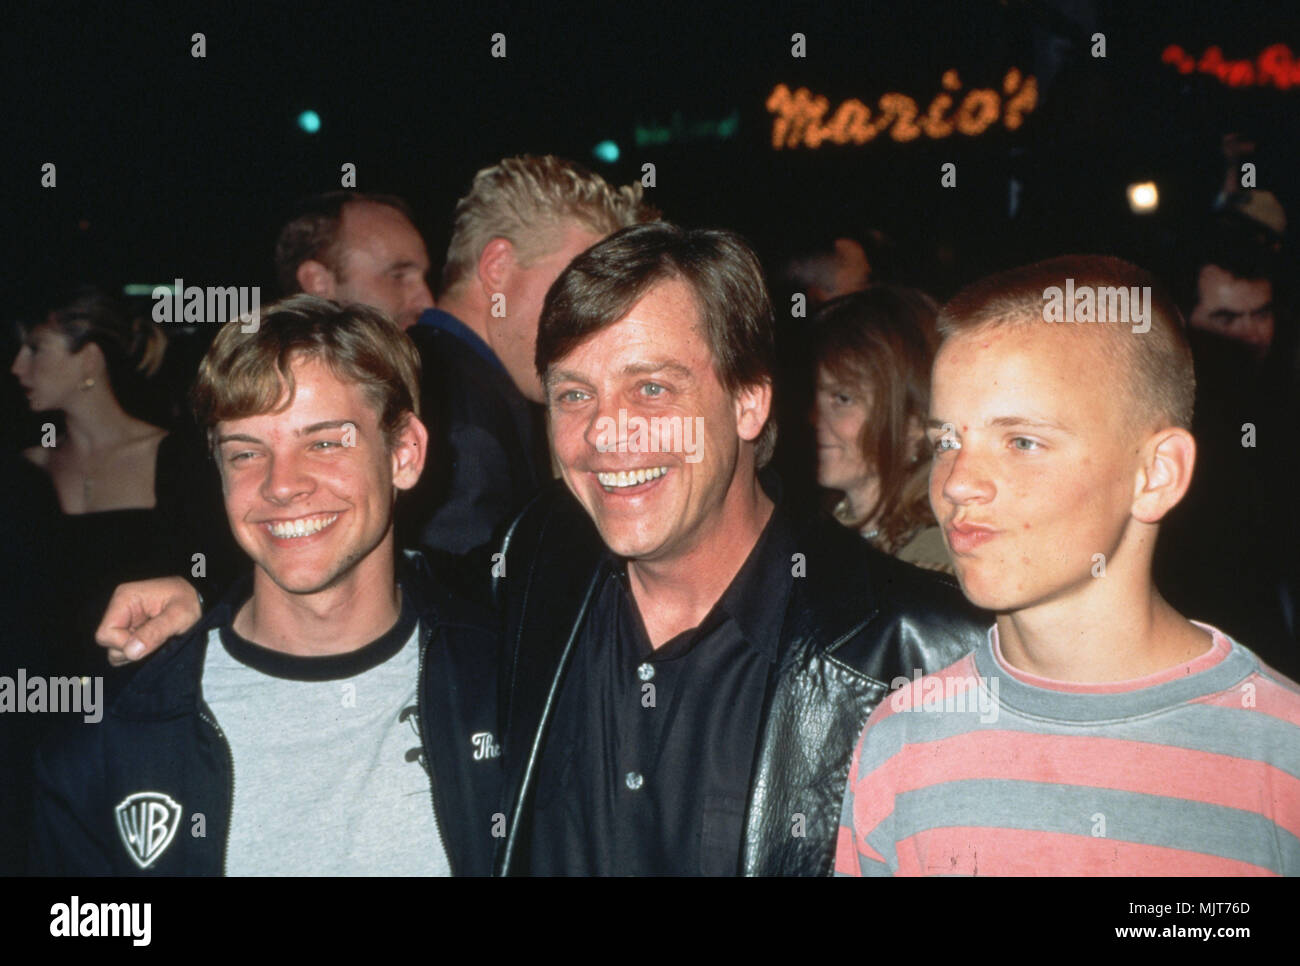 Mark hamill young hi-res stock photography and images - Alamy